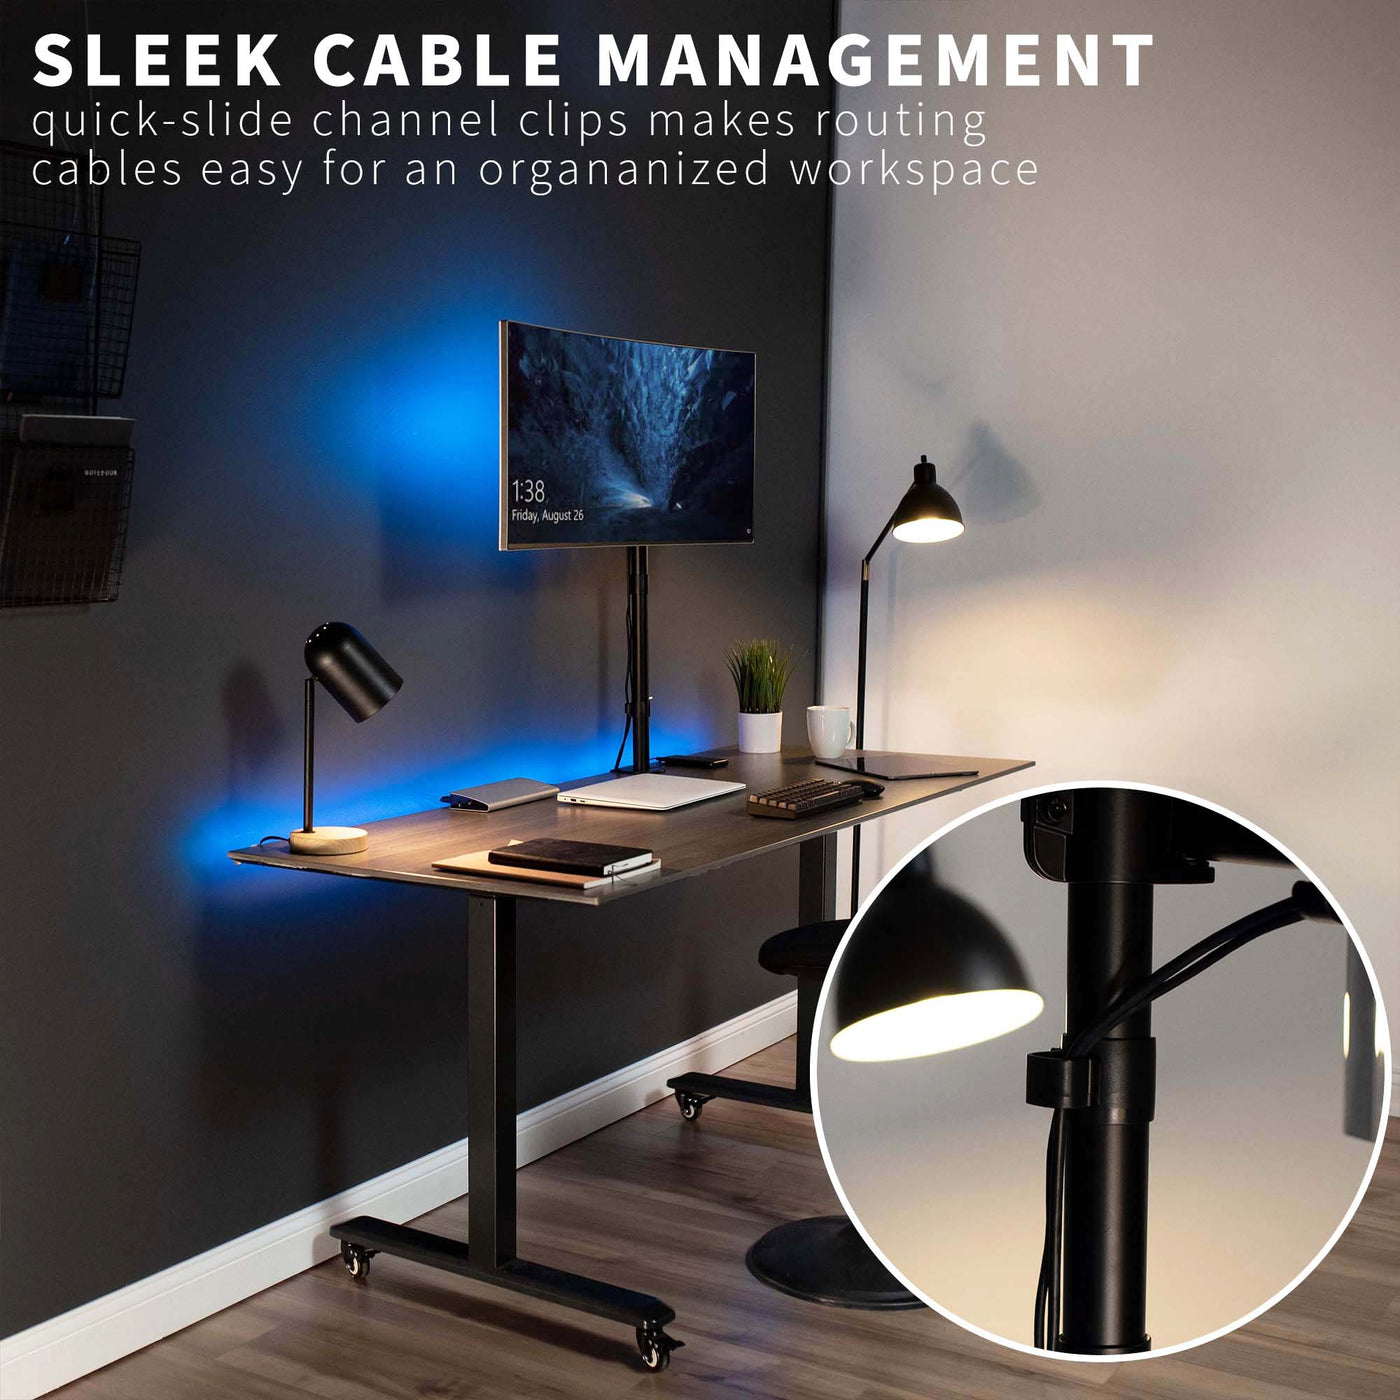 Extra tall sturdy adjustable single monitor ergonomic desk mount with cable management.